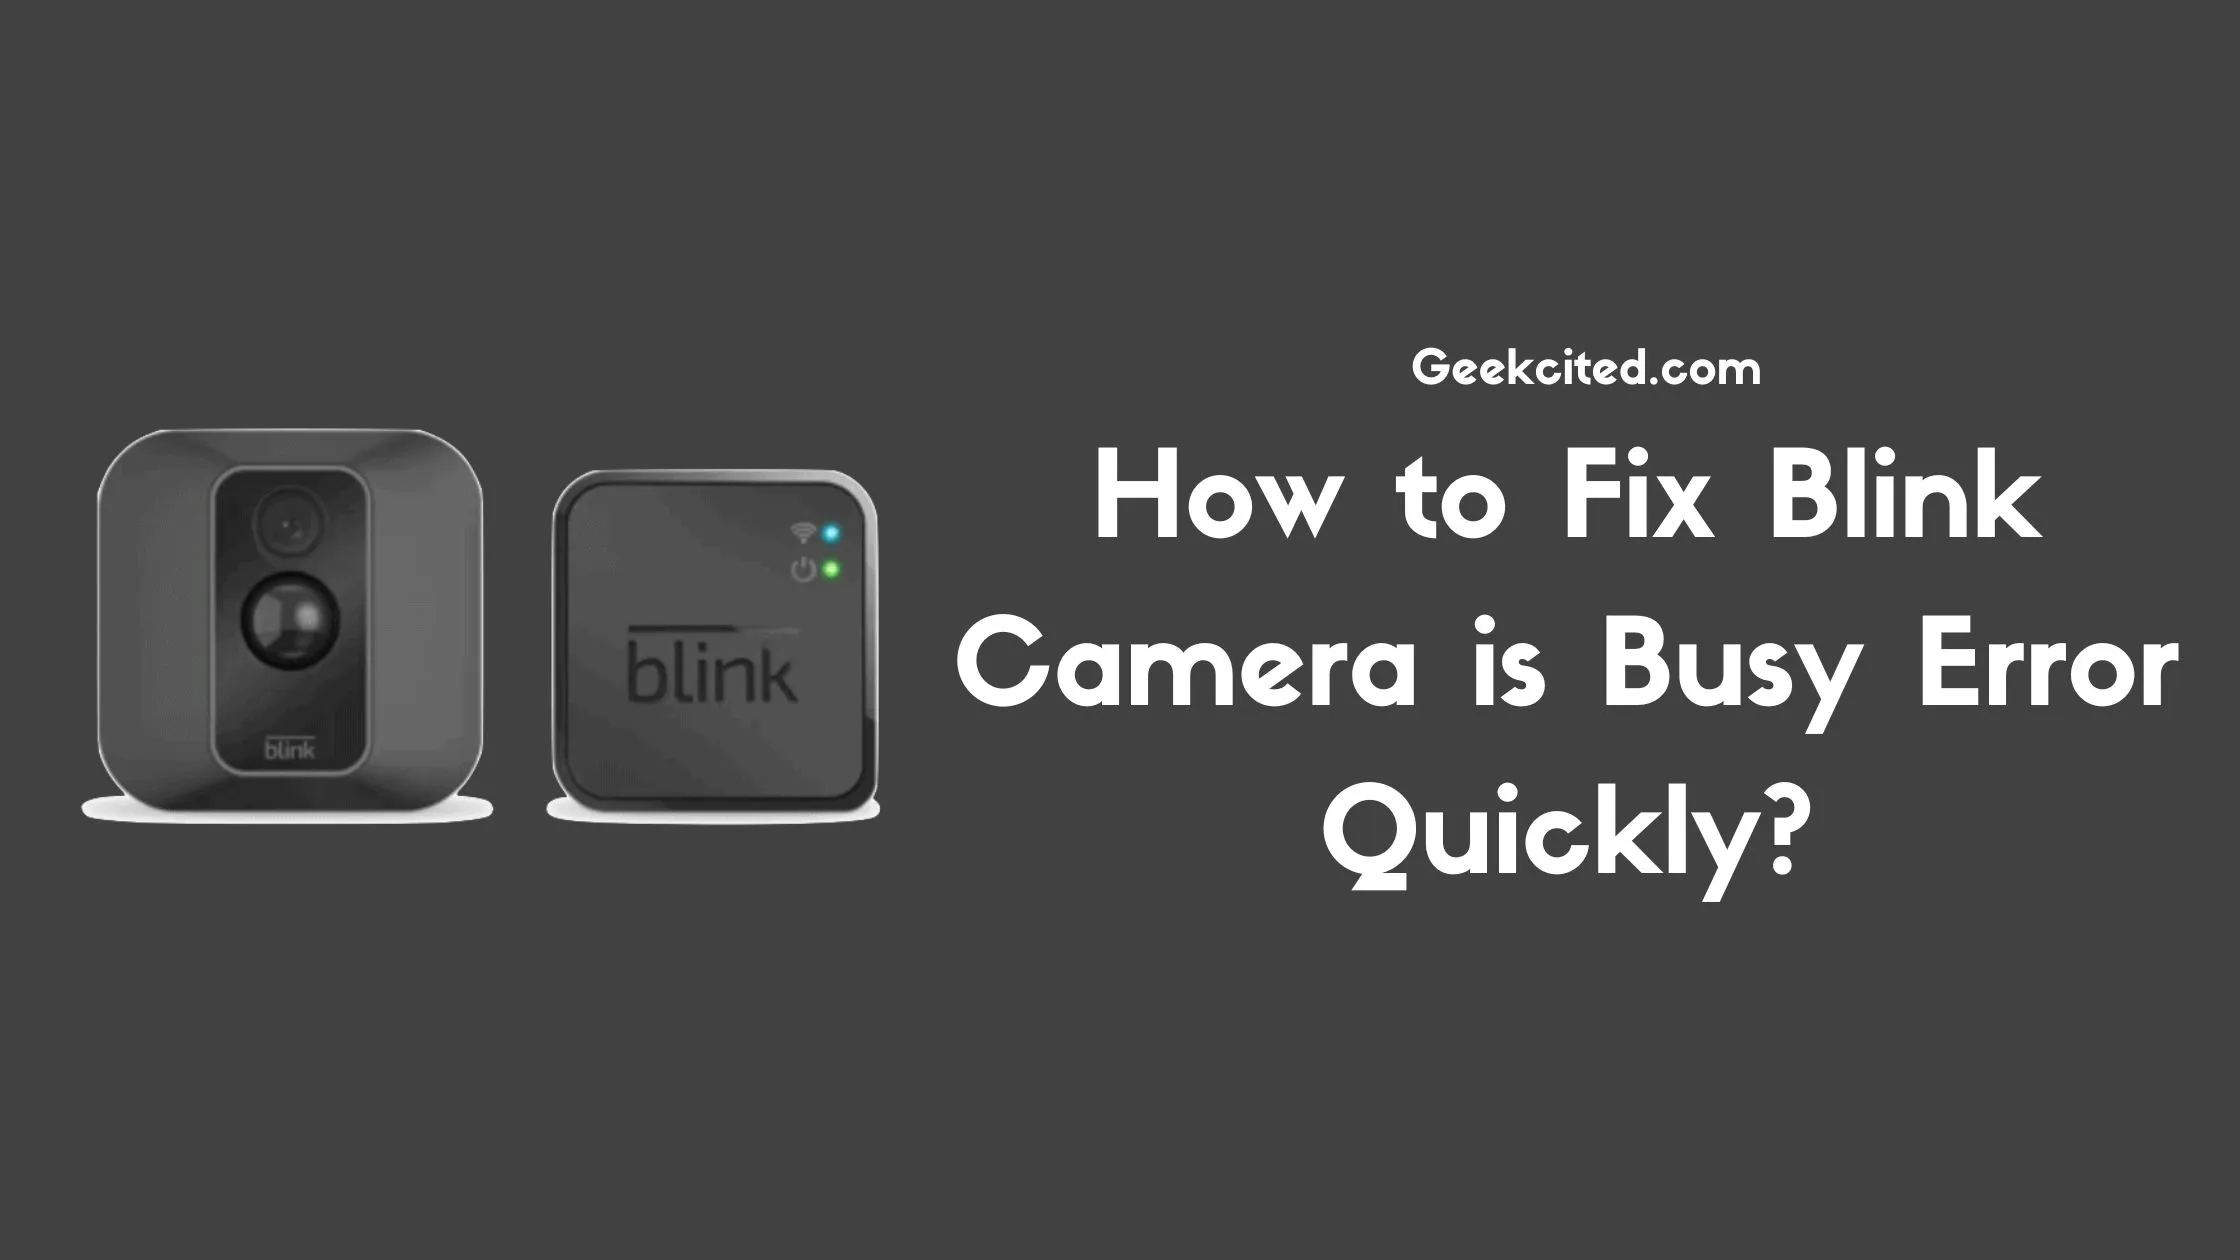 How to Fix Blink Camera is Busy Error Quickly